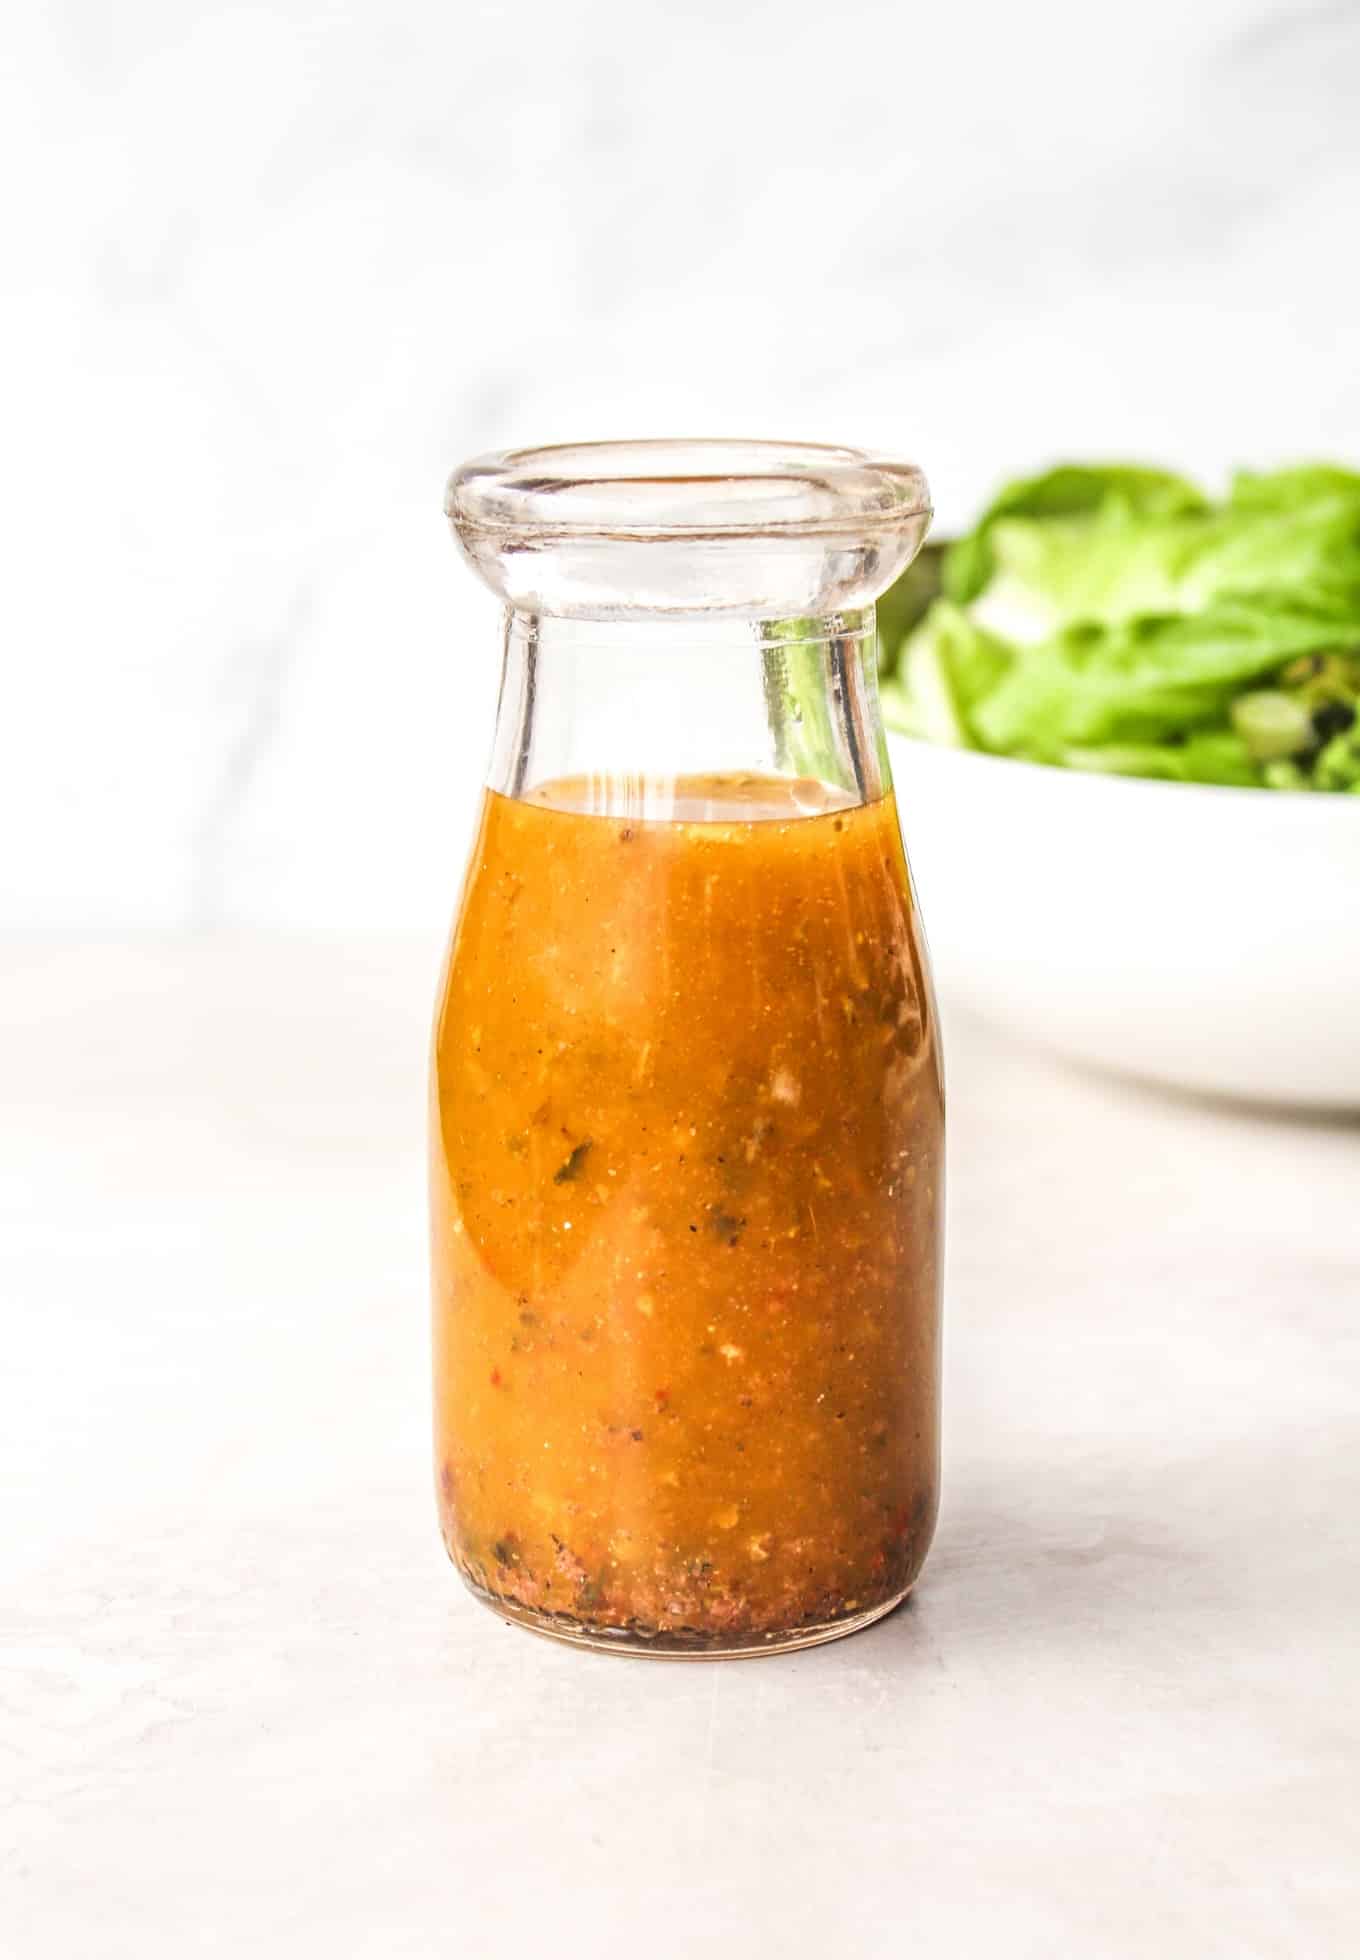 https://thewholecook.com/wp-content/uploads/2017/12/Easy-Homemade-Italian-Dressing-by-The-Whole-Cook-new-vertical.jpg